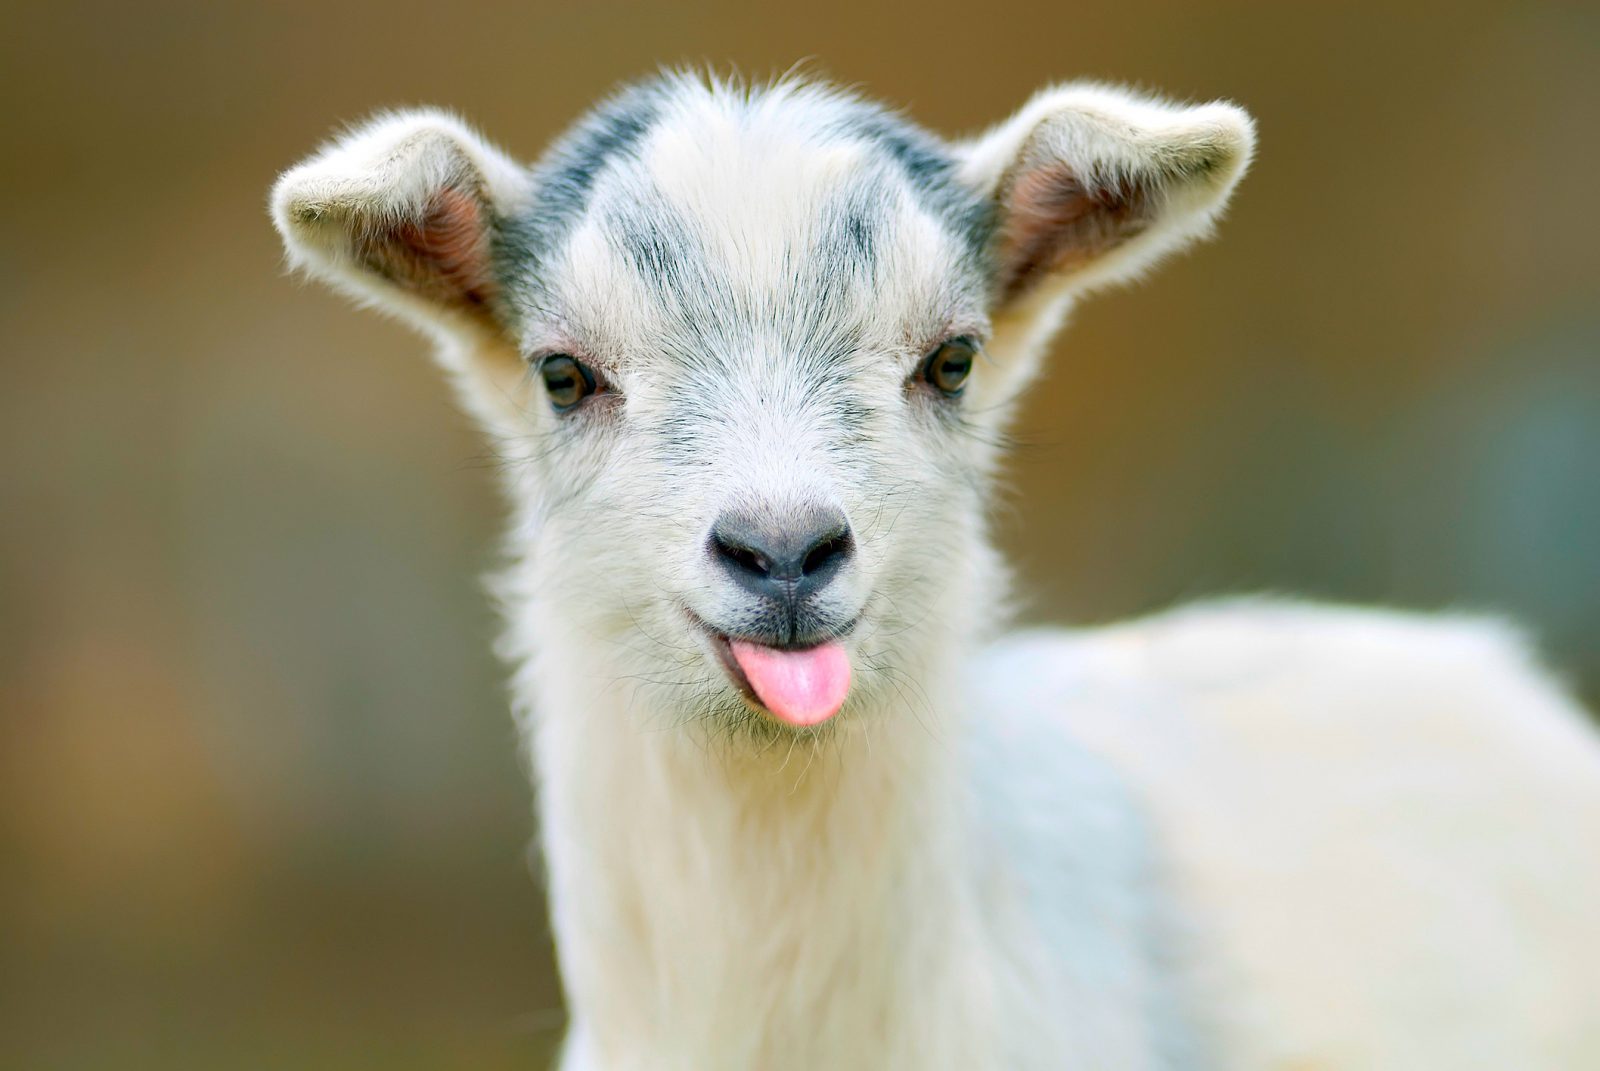 If You Get 16/25 on This Random Knowledge Quiz, You Know Something About Every Subject Baby goat